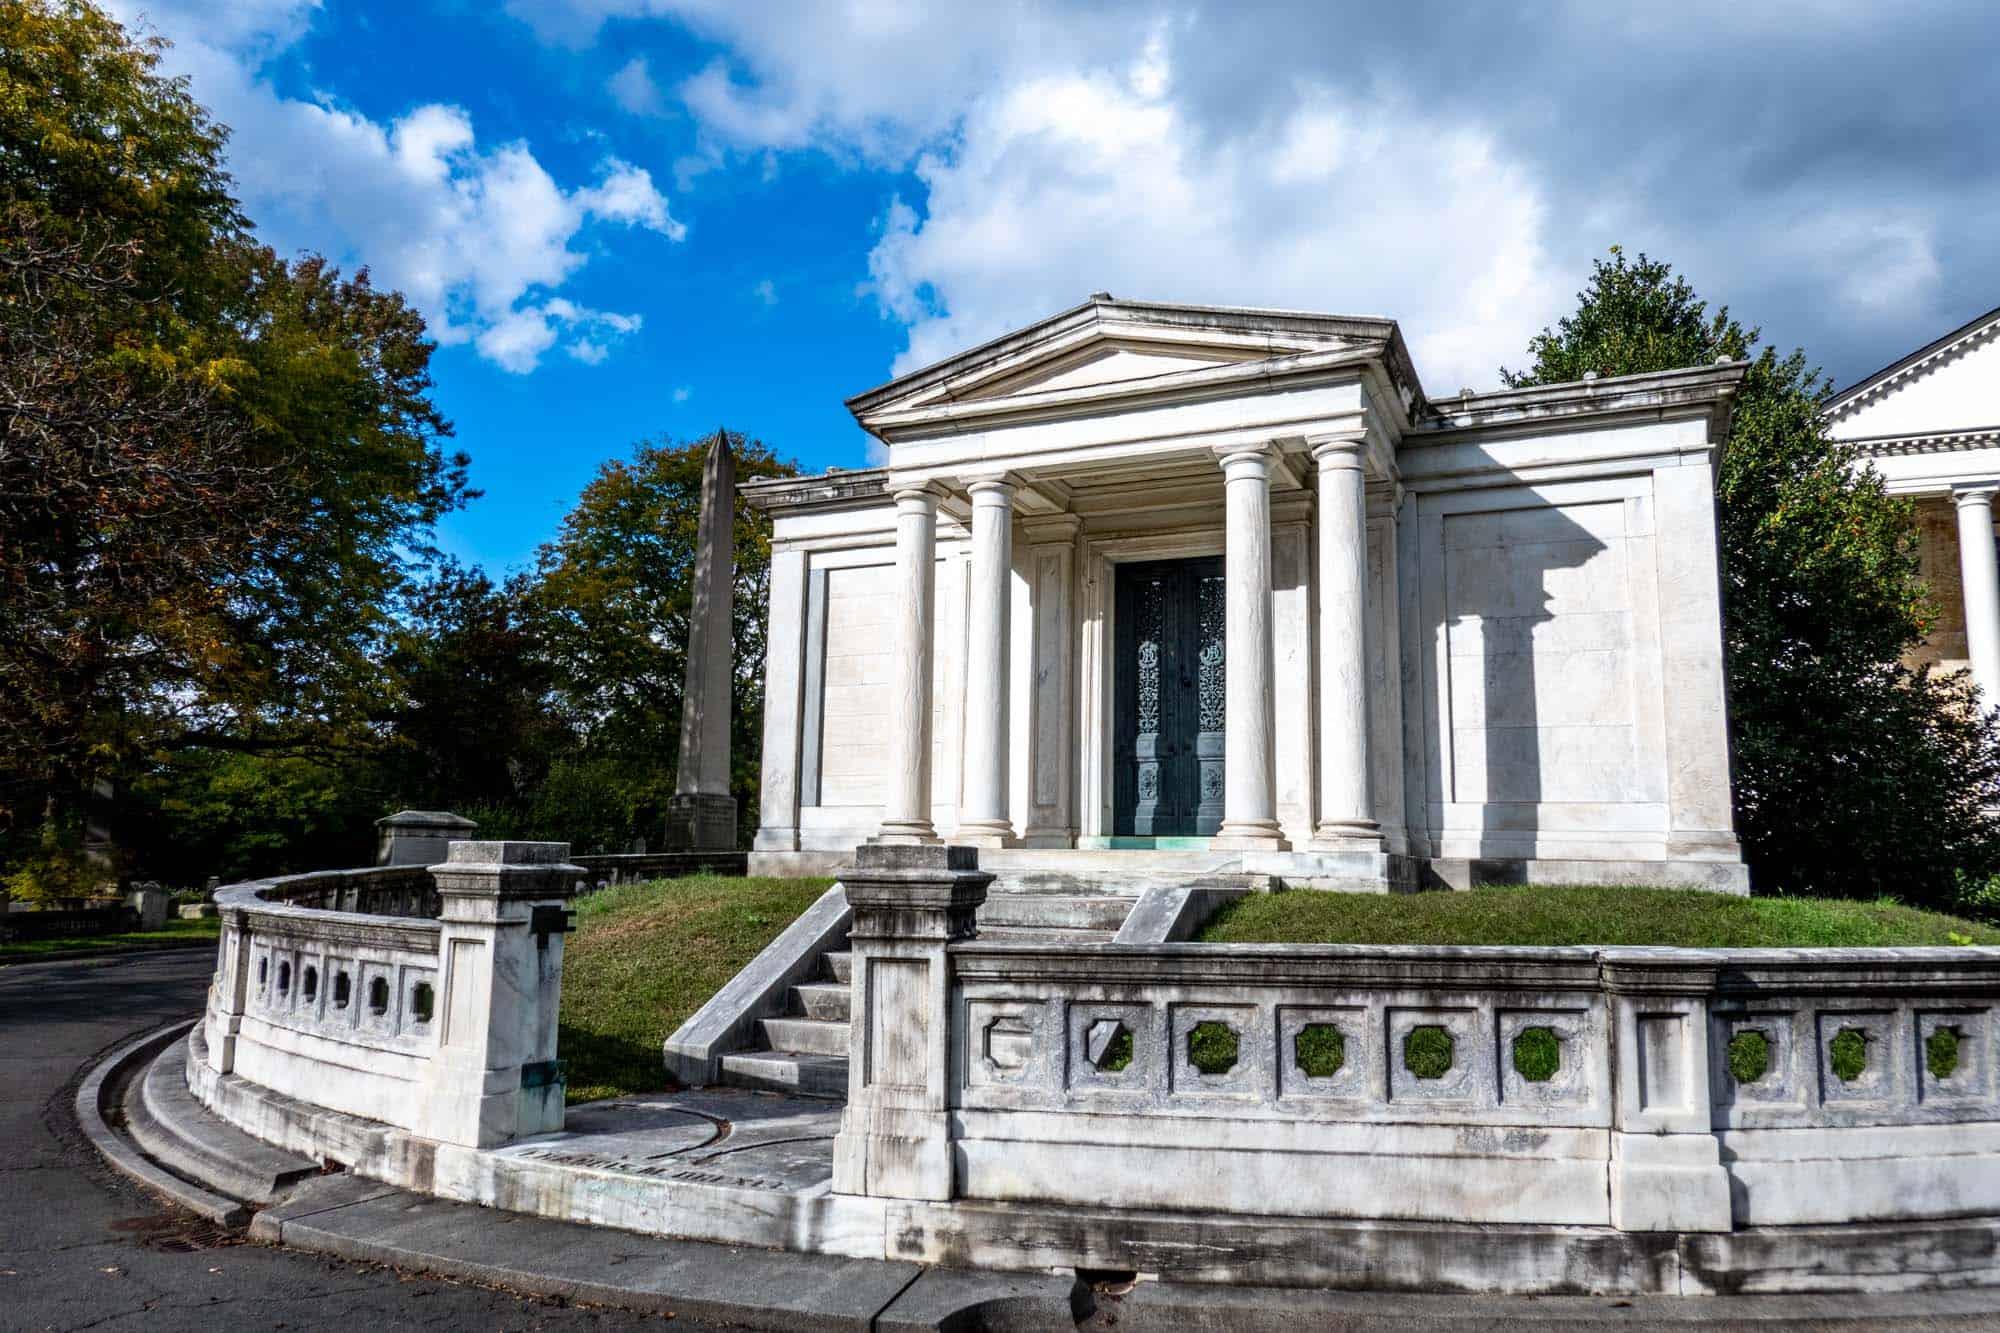 White building with columns, a grave monument for Francis M. Drexel